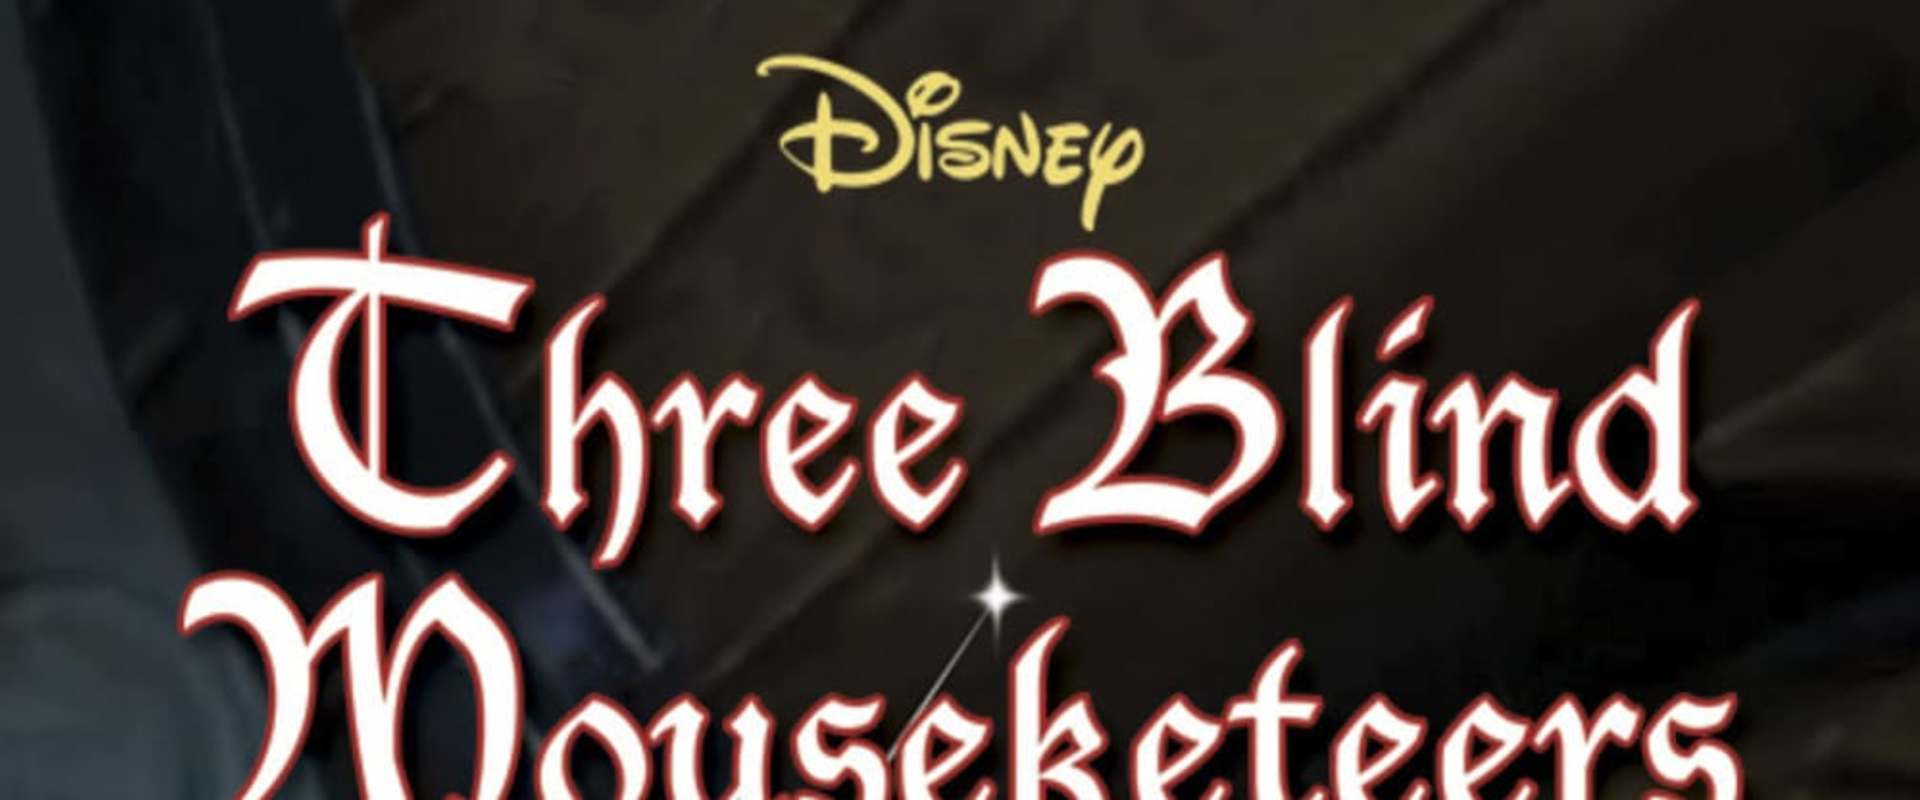 Three Blind Mouseketeers background 2